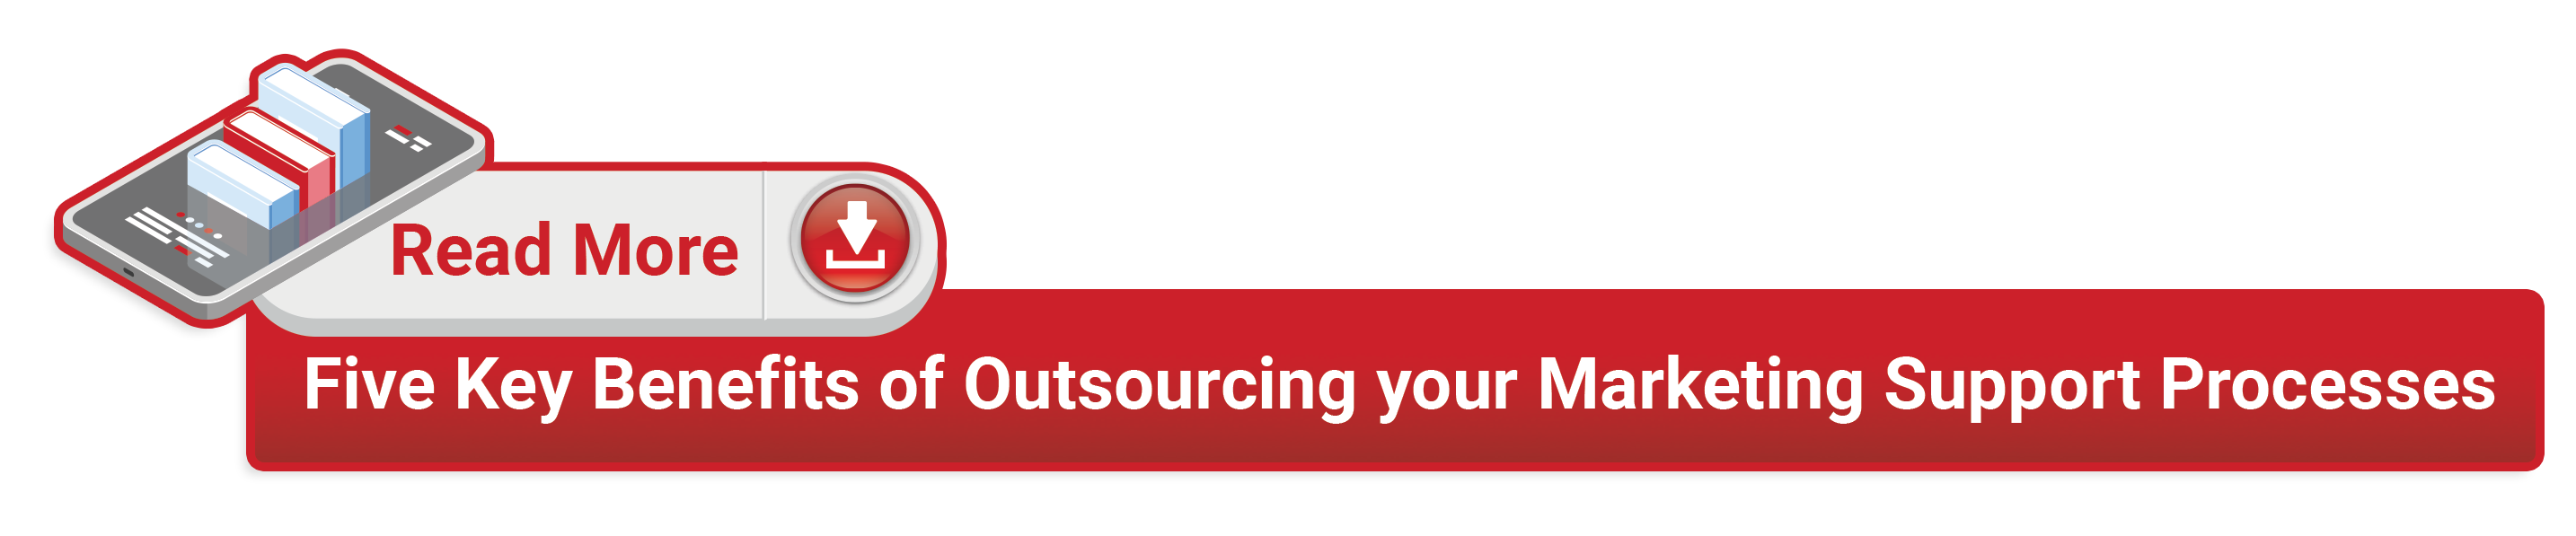 Infinit-O Shares Five Key Benefits of Outsourcing Your Marketing Support Processes